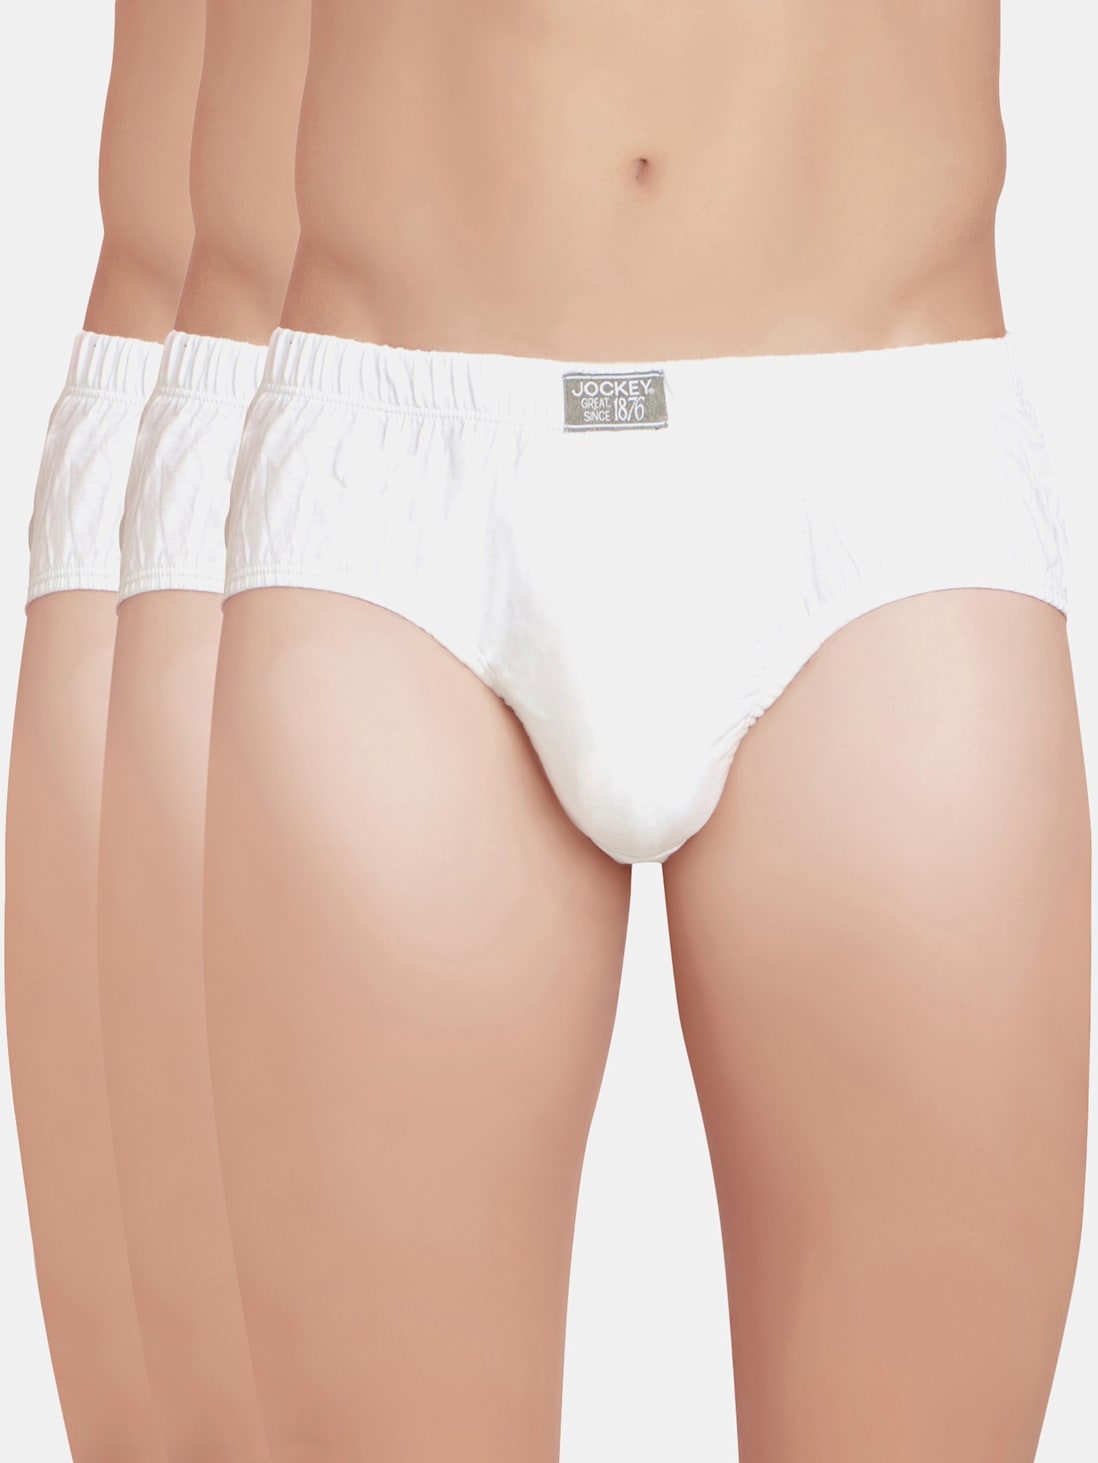 Jockey Men's Super Combed Cotton Solid Poco Brief with Ultrasoft Concealed Waistband - White 8035 (Pack of 3) - ShopIMO